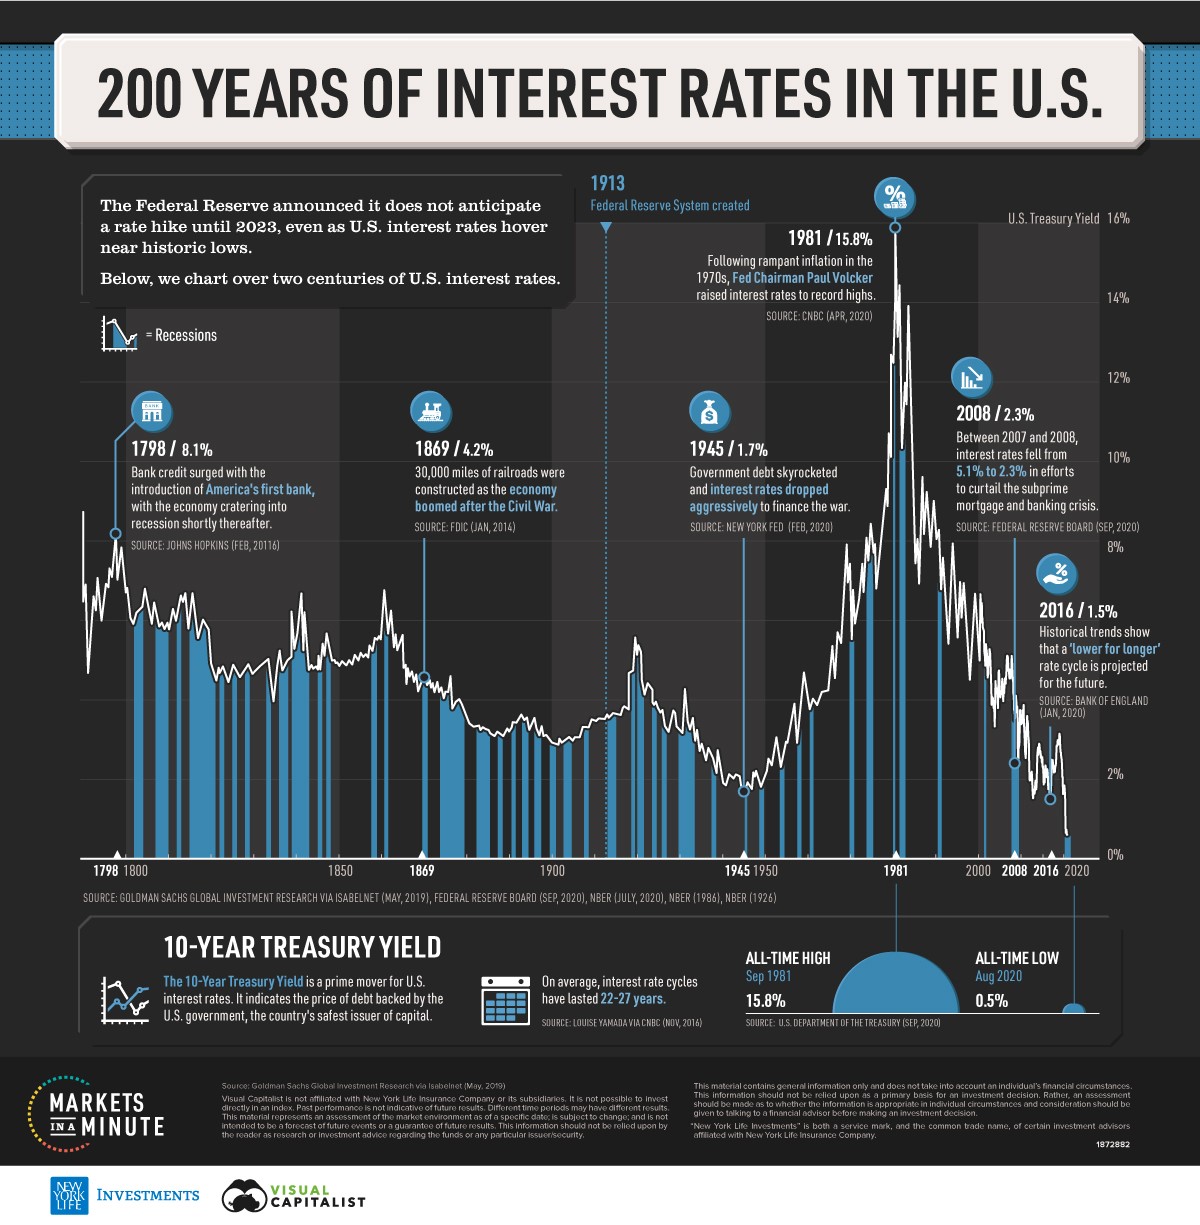 interest, What Interest Rate Triggers The Next Crisis?